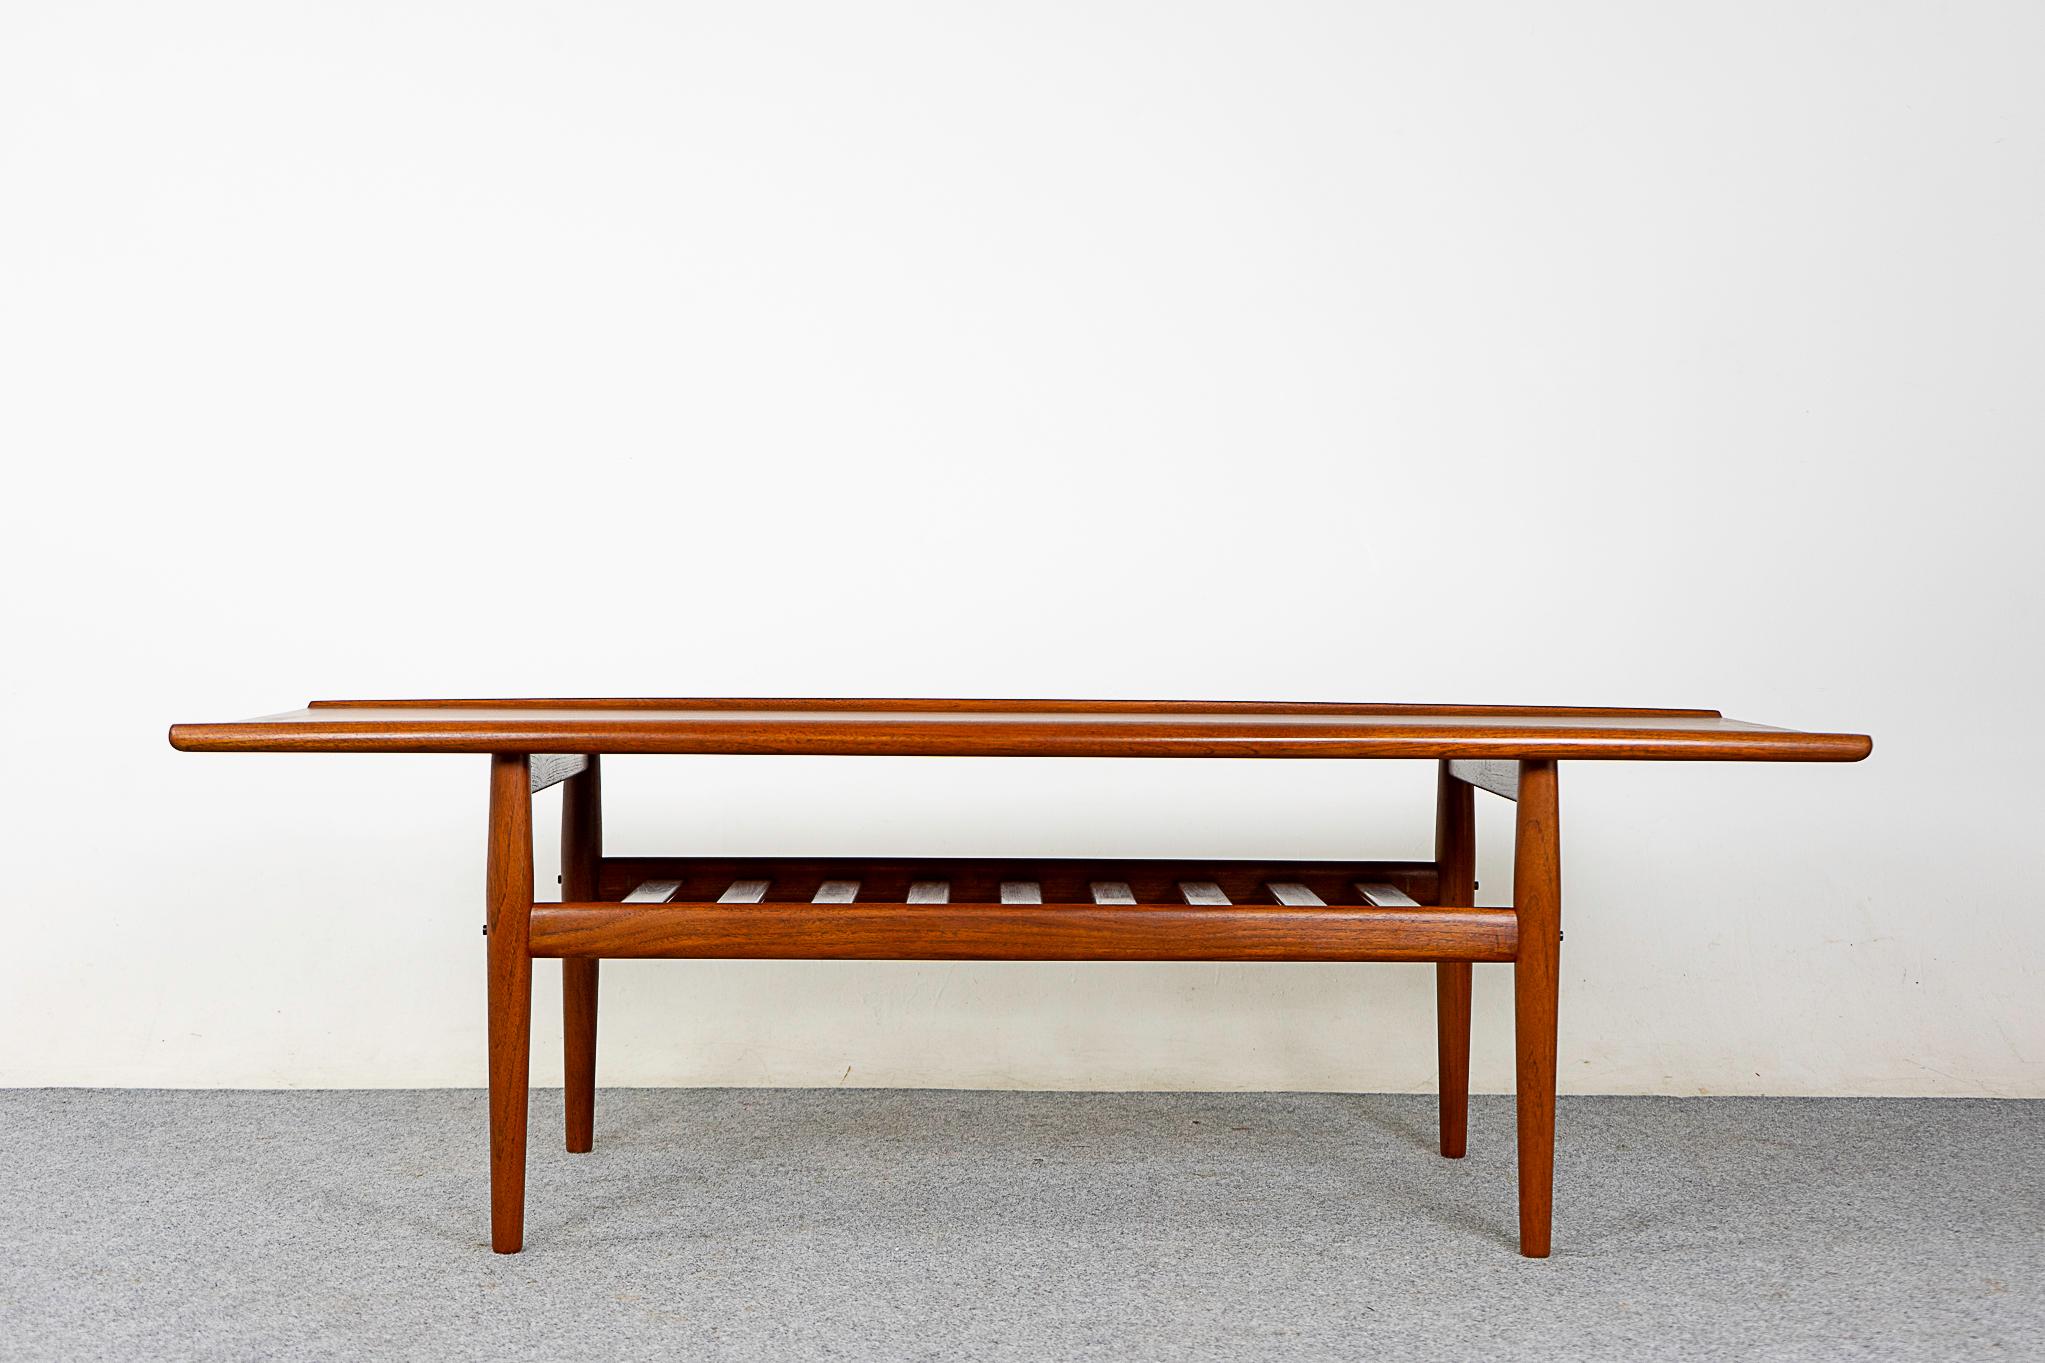 Teak Danish coffee table by Svend Aage Eriksen for Glostrup, circa 1960's. Top shows beautiful book matched veneer and solid wood curved edge along its length. Slatted shelf gives an airy impression, perfect for magazines & remote controls. Danish